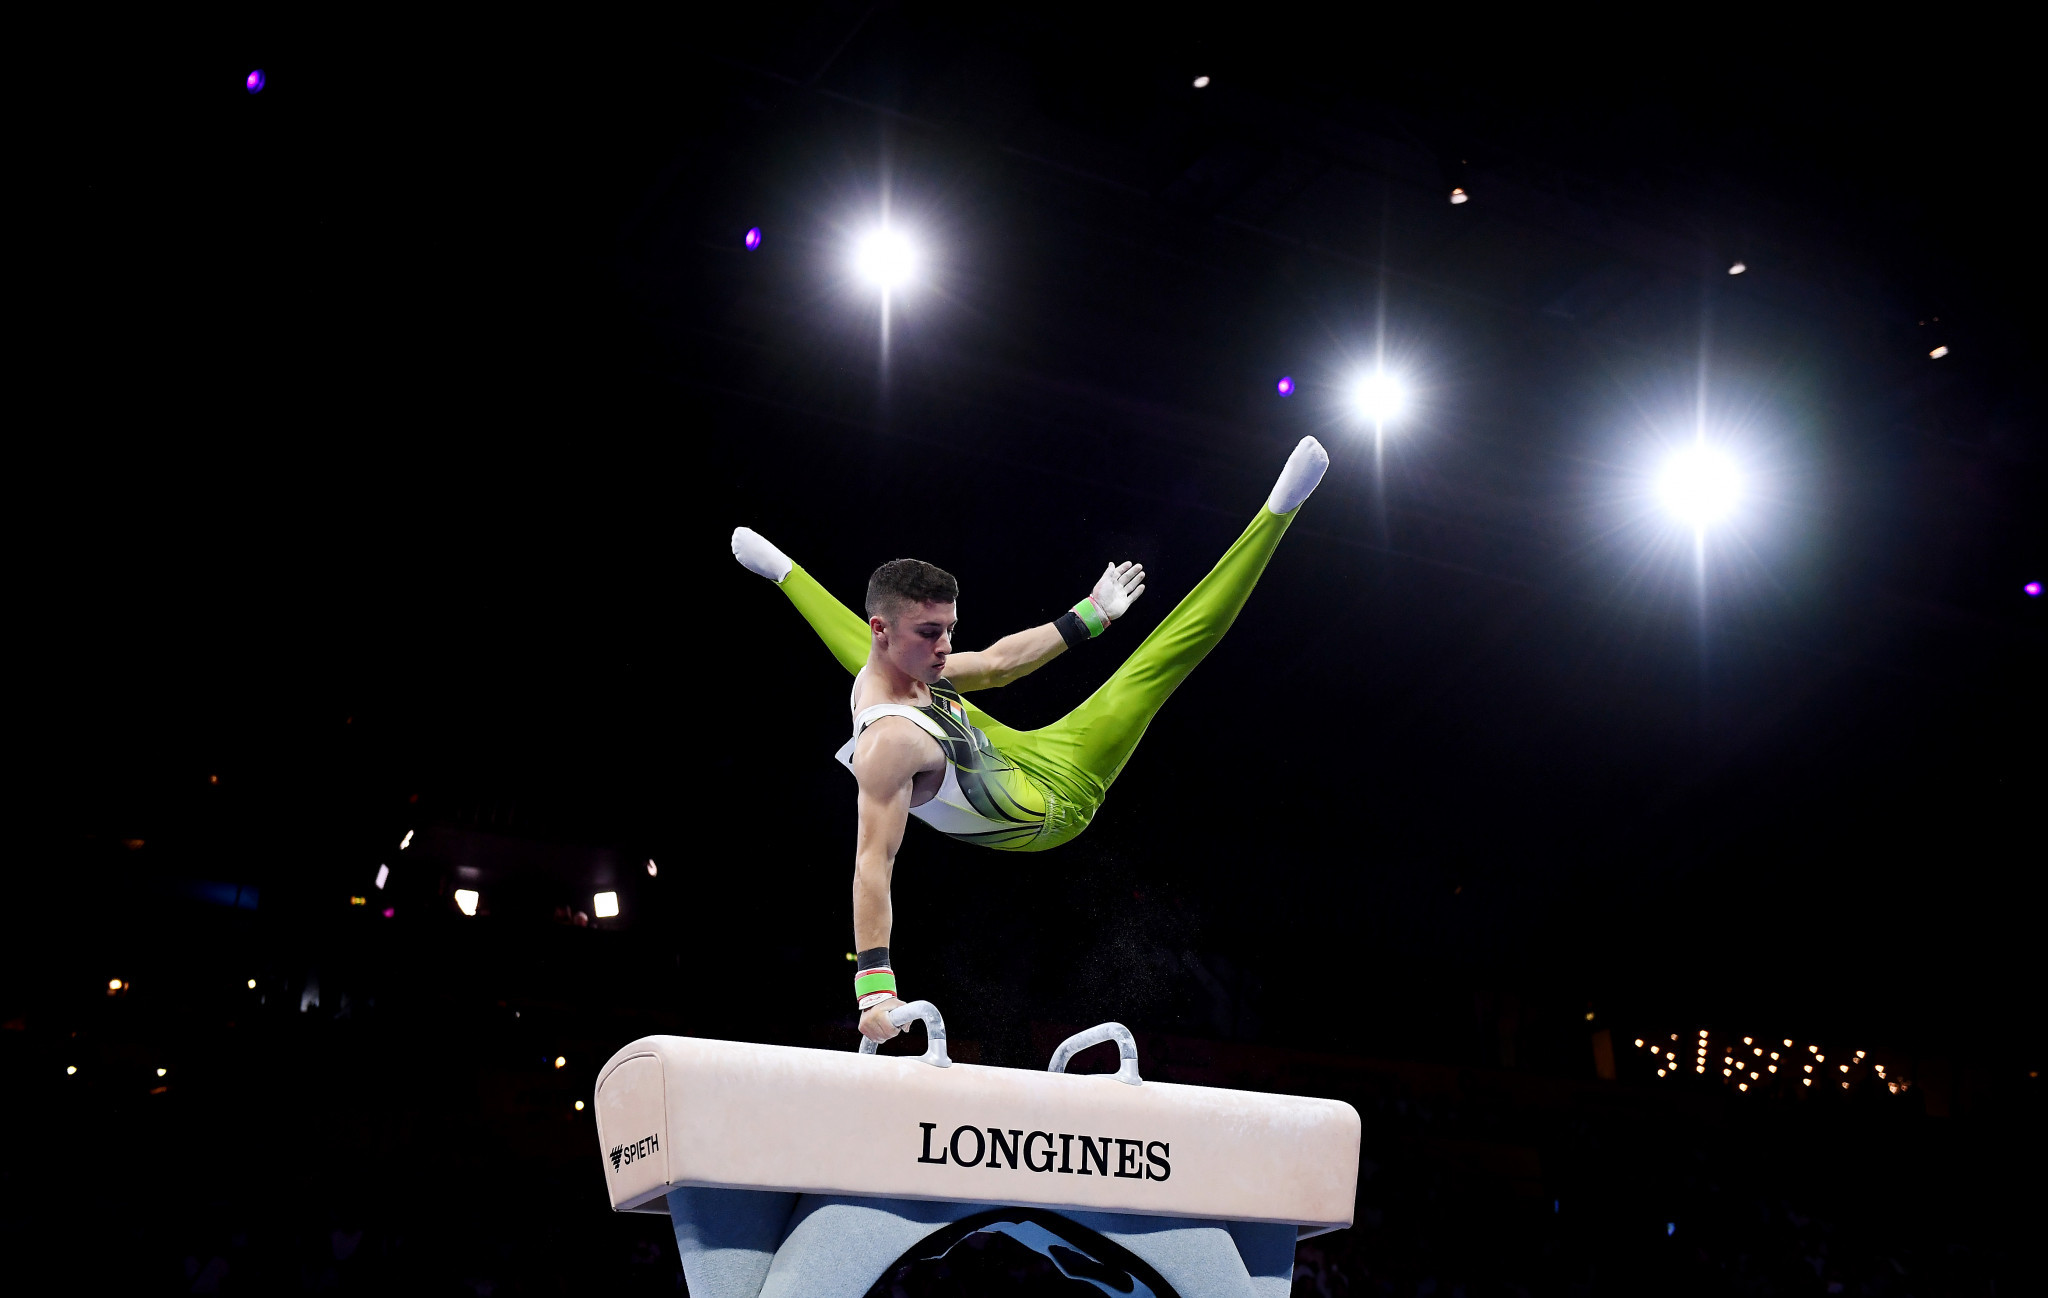 Rhys McClenaghan will currently be unable to defend his Commonwealth Games pommel horse title ©Getty Images